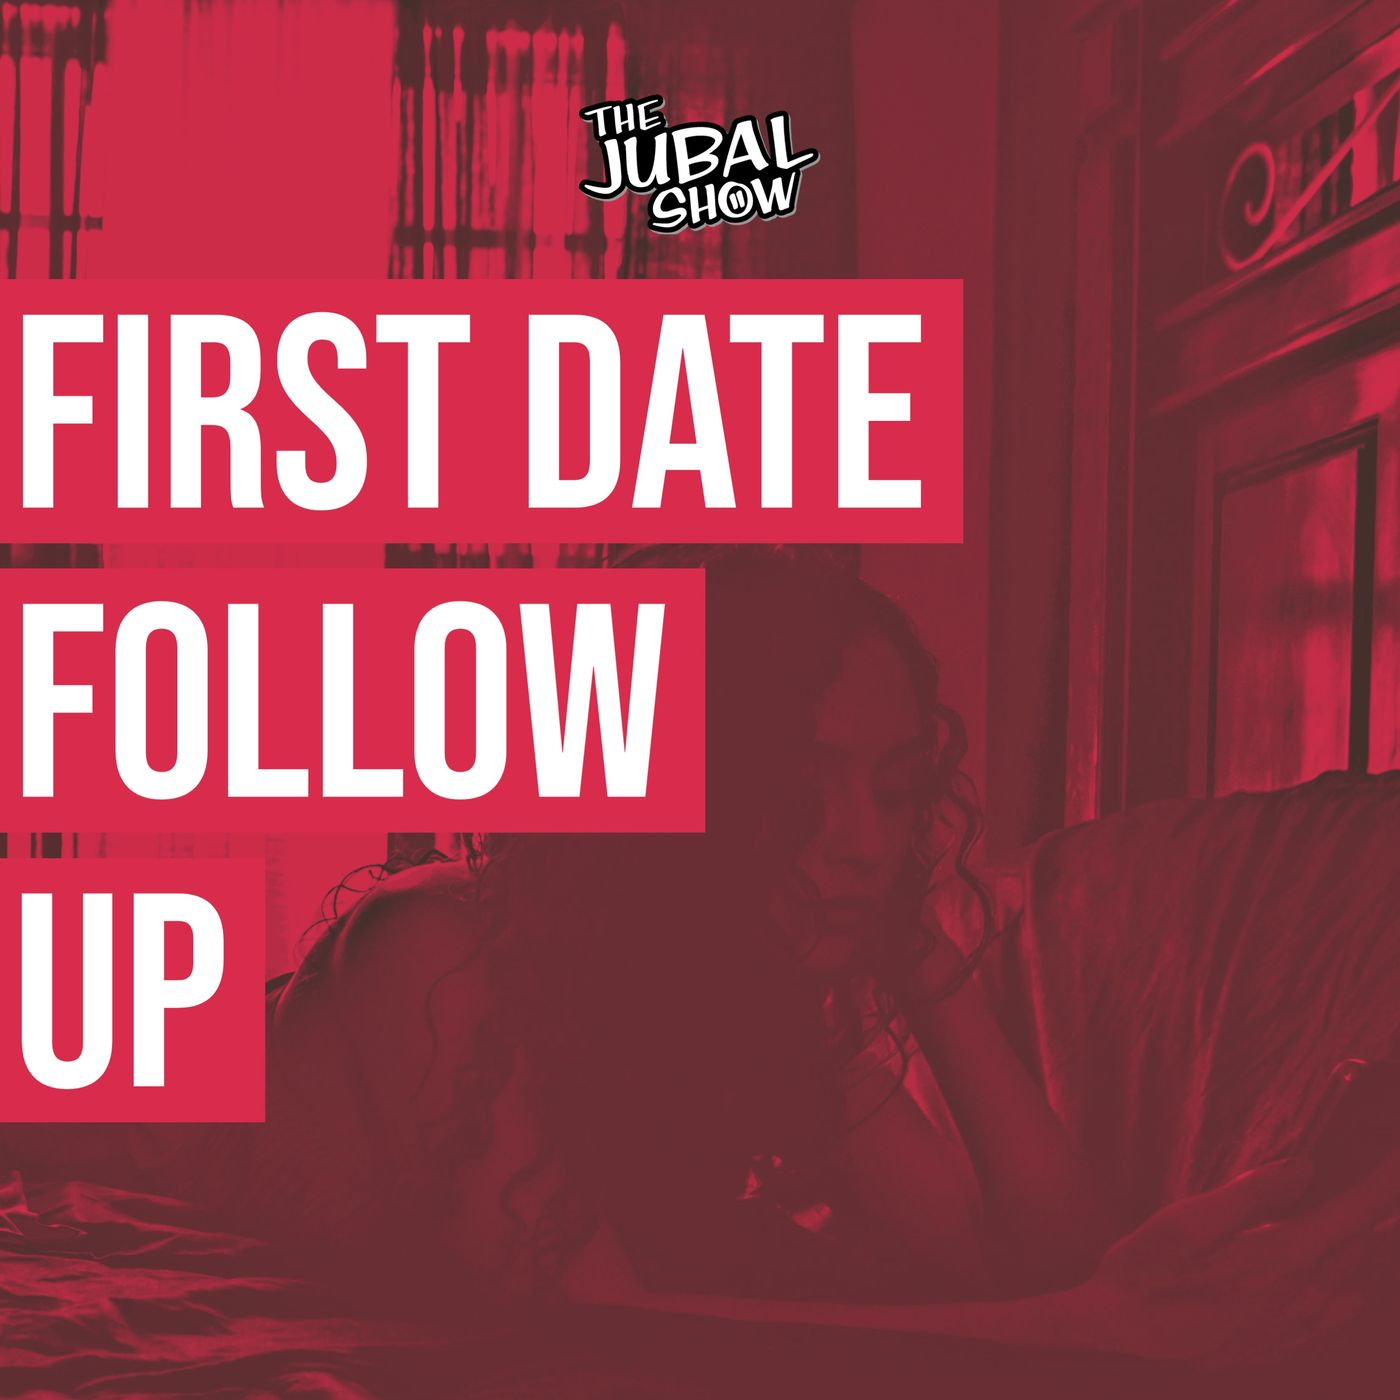 This First Date Follow Up is well-endowed!